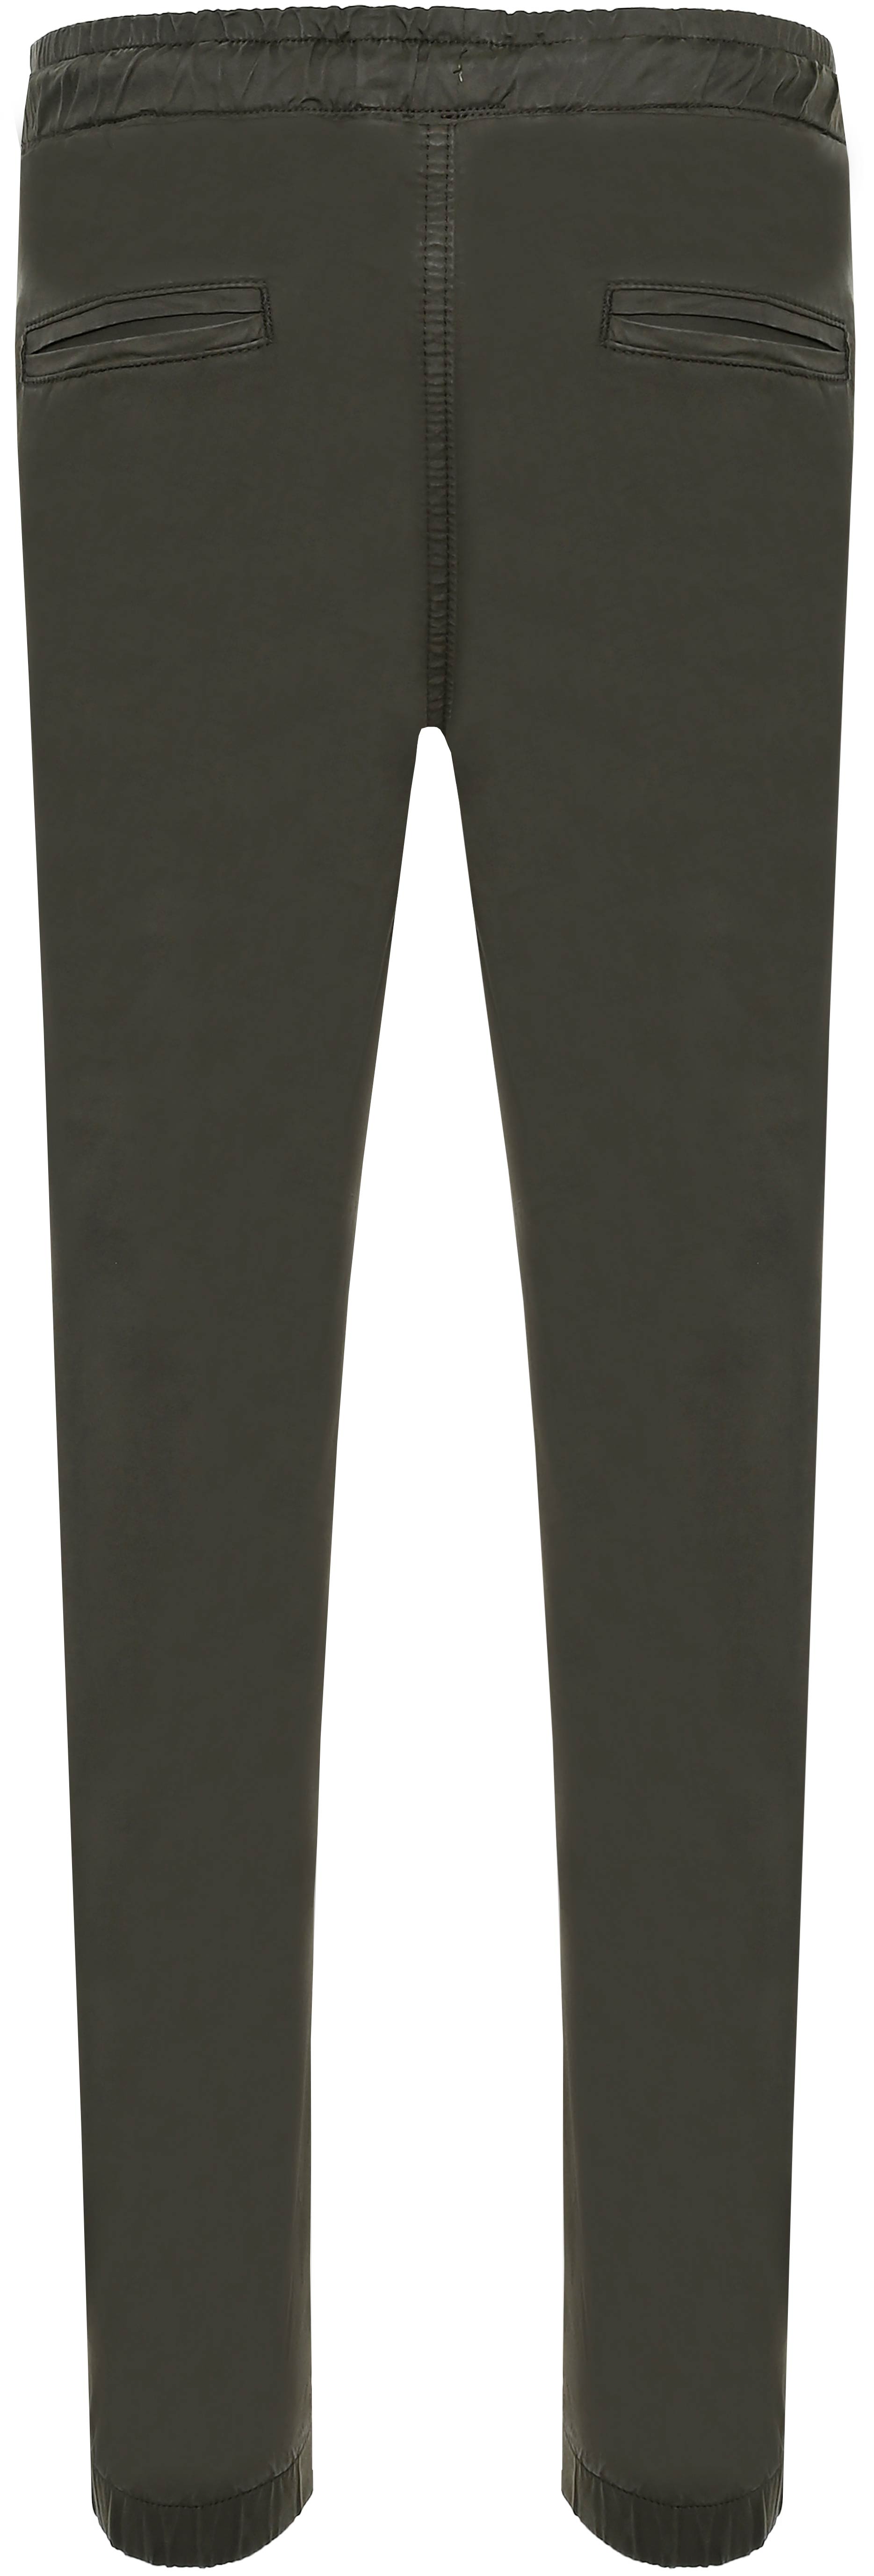 2823-Boys Utility Jogg-Pant  available in Slim,Normal